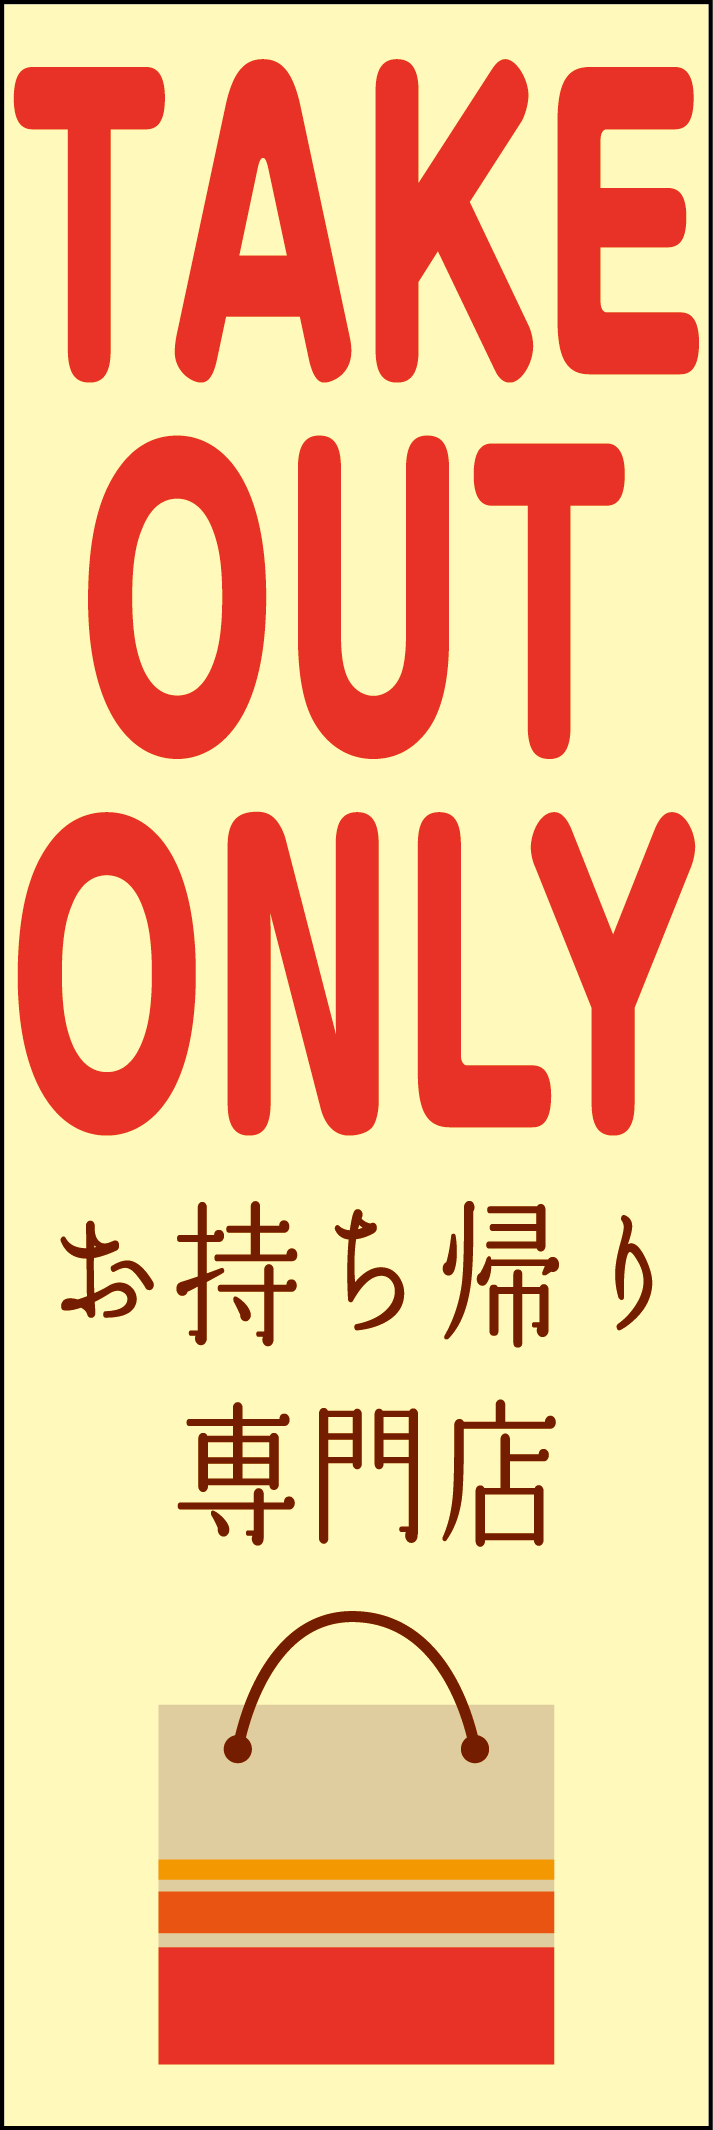 TAKE OUT ONLY お持ち帰り専門店のぼり